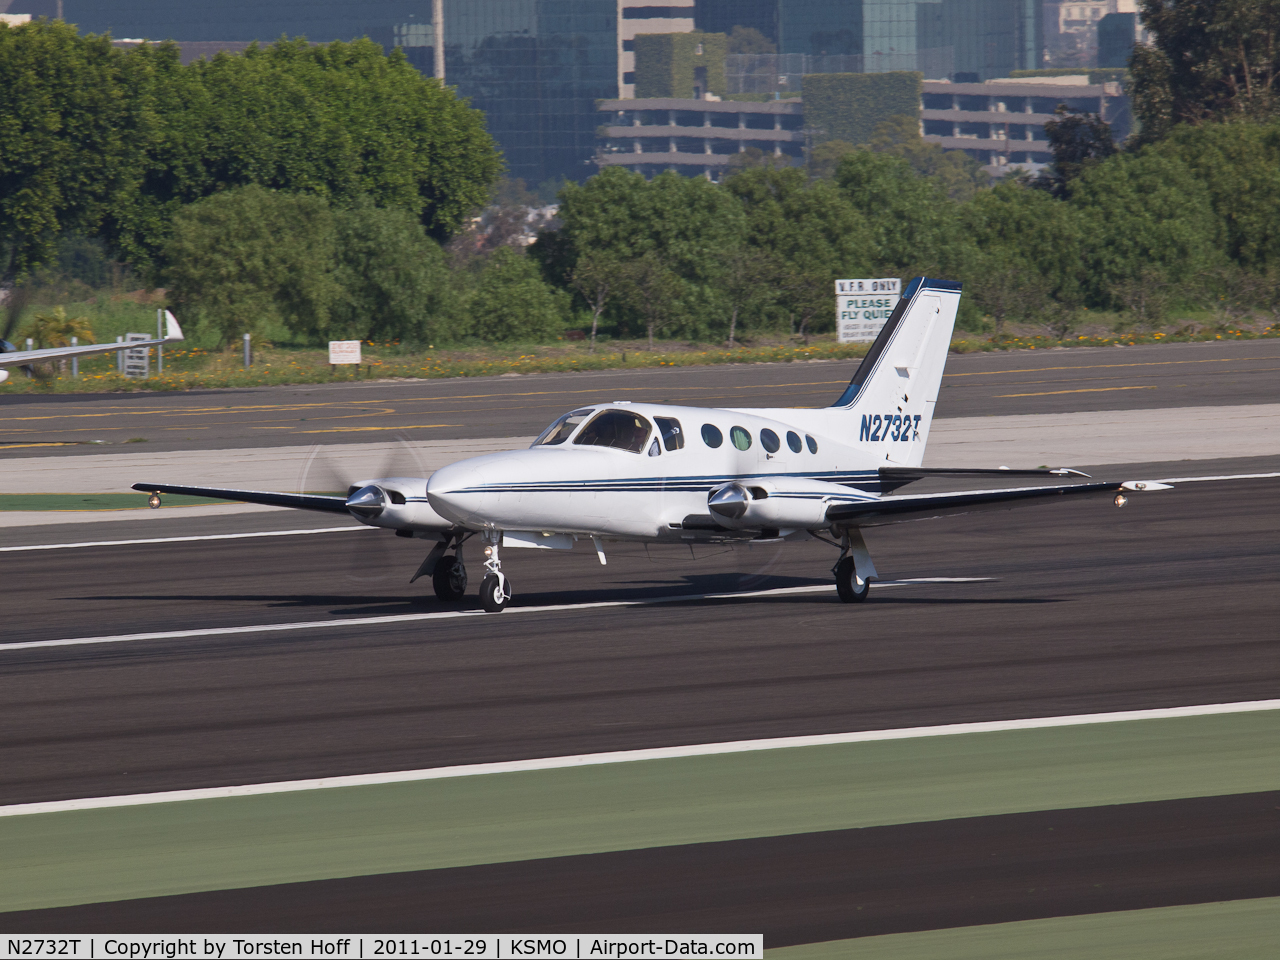 N2732T, 1979 Cessna 414A Chancellor C/N 414A0449, N2732T departing from RWY 21